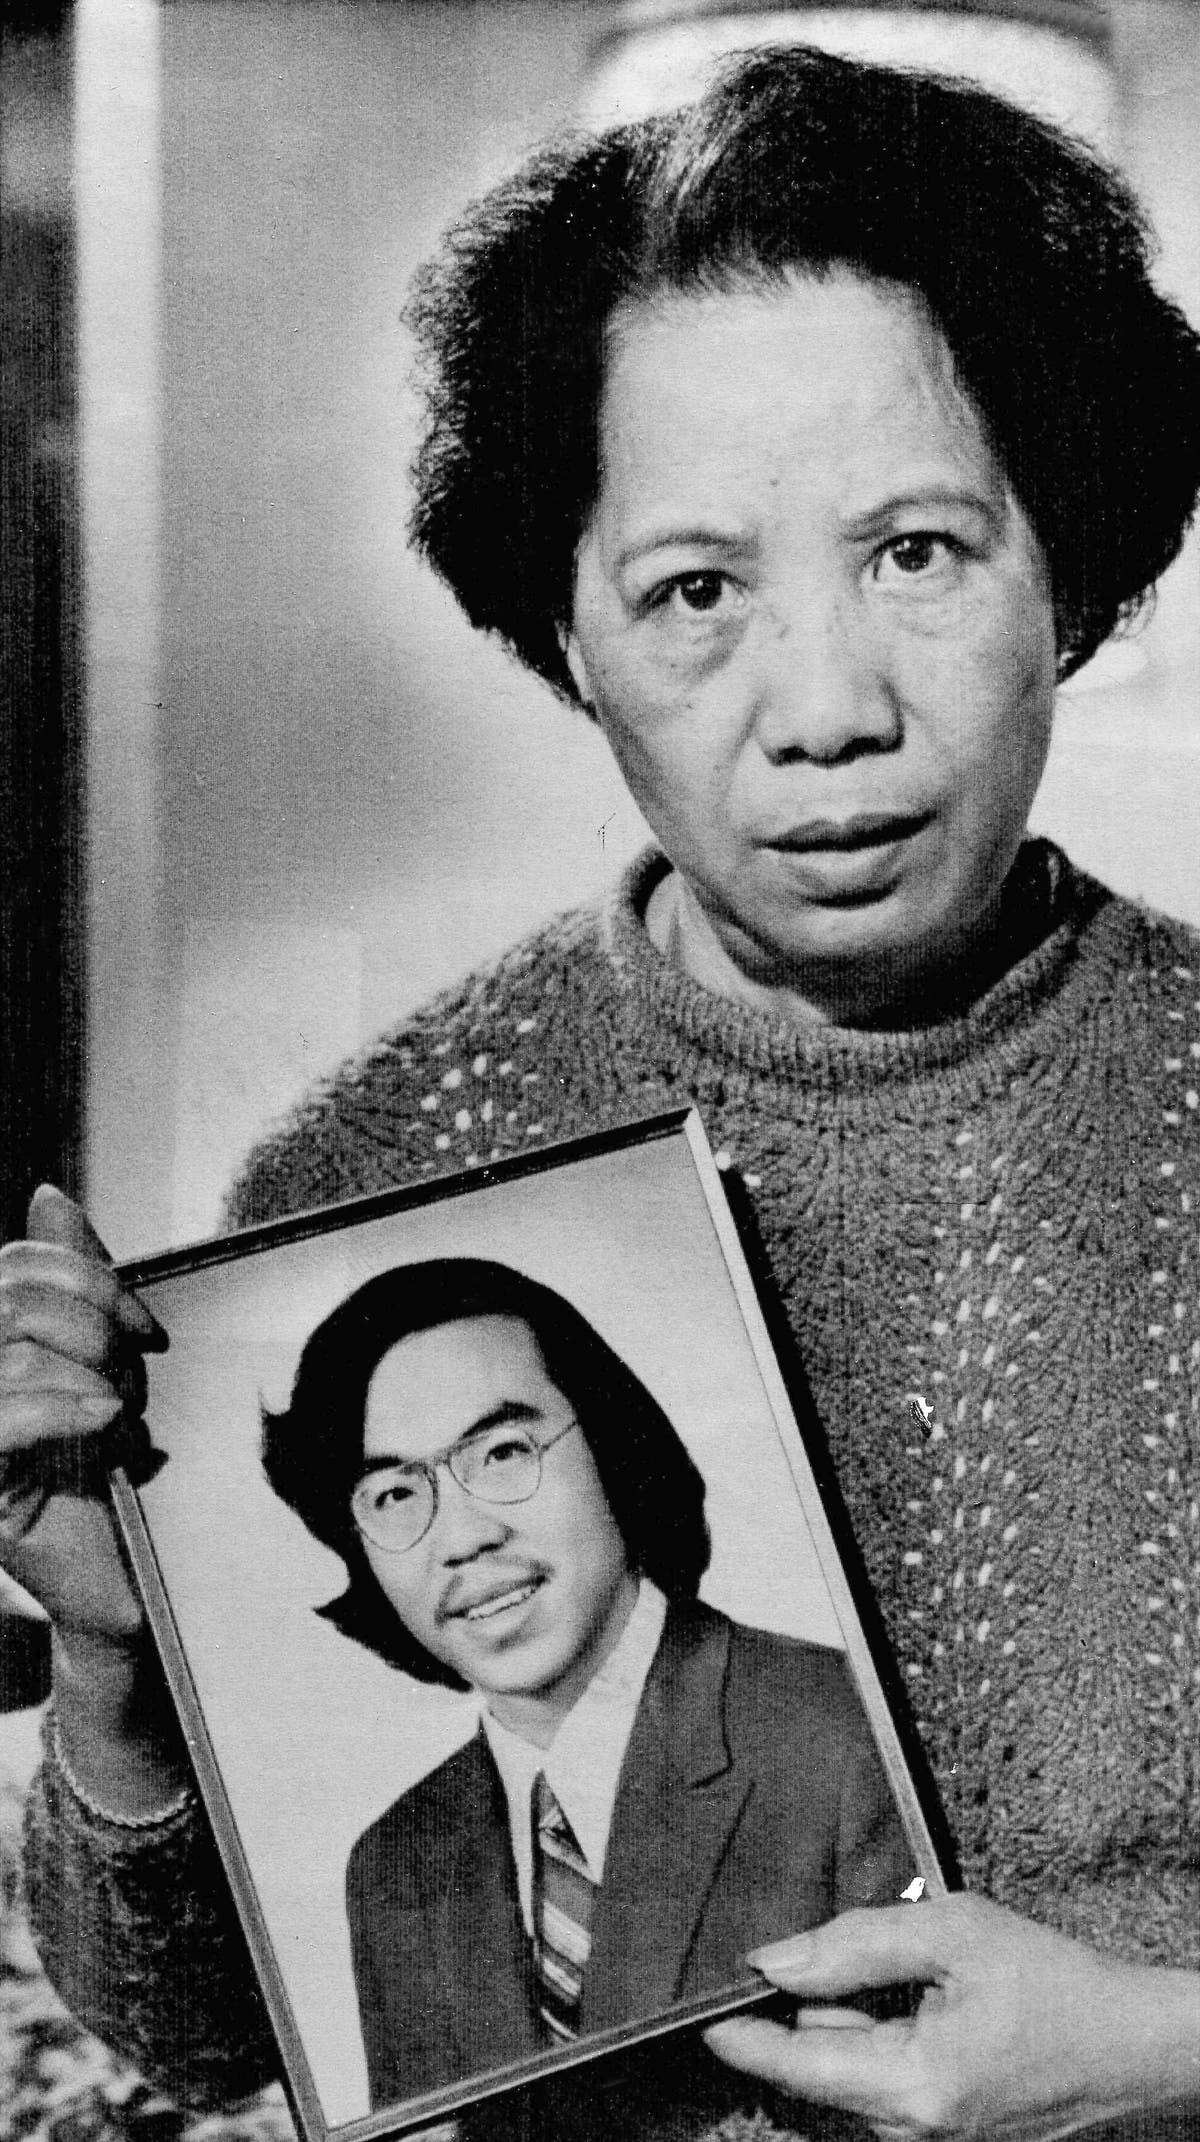 Detroit honors Vincent Chin, Asian American killed in 1982